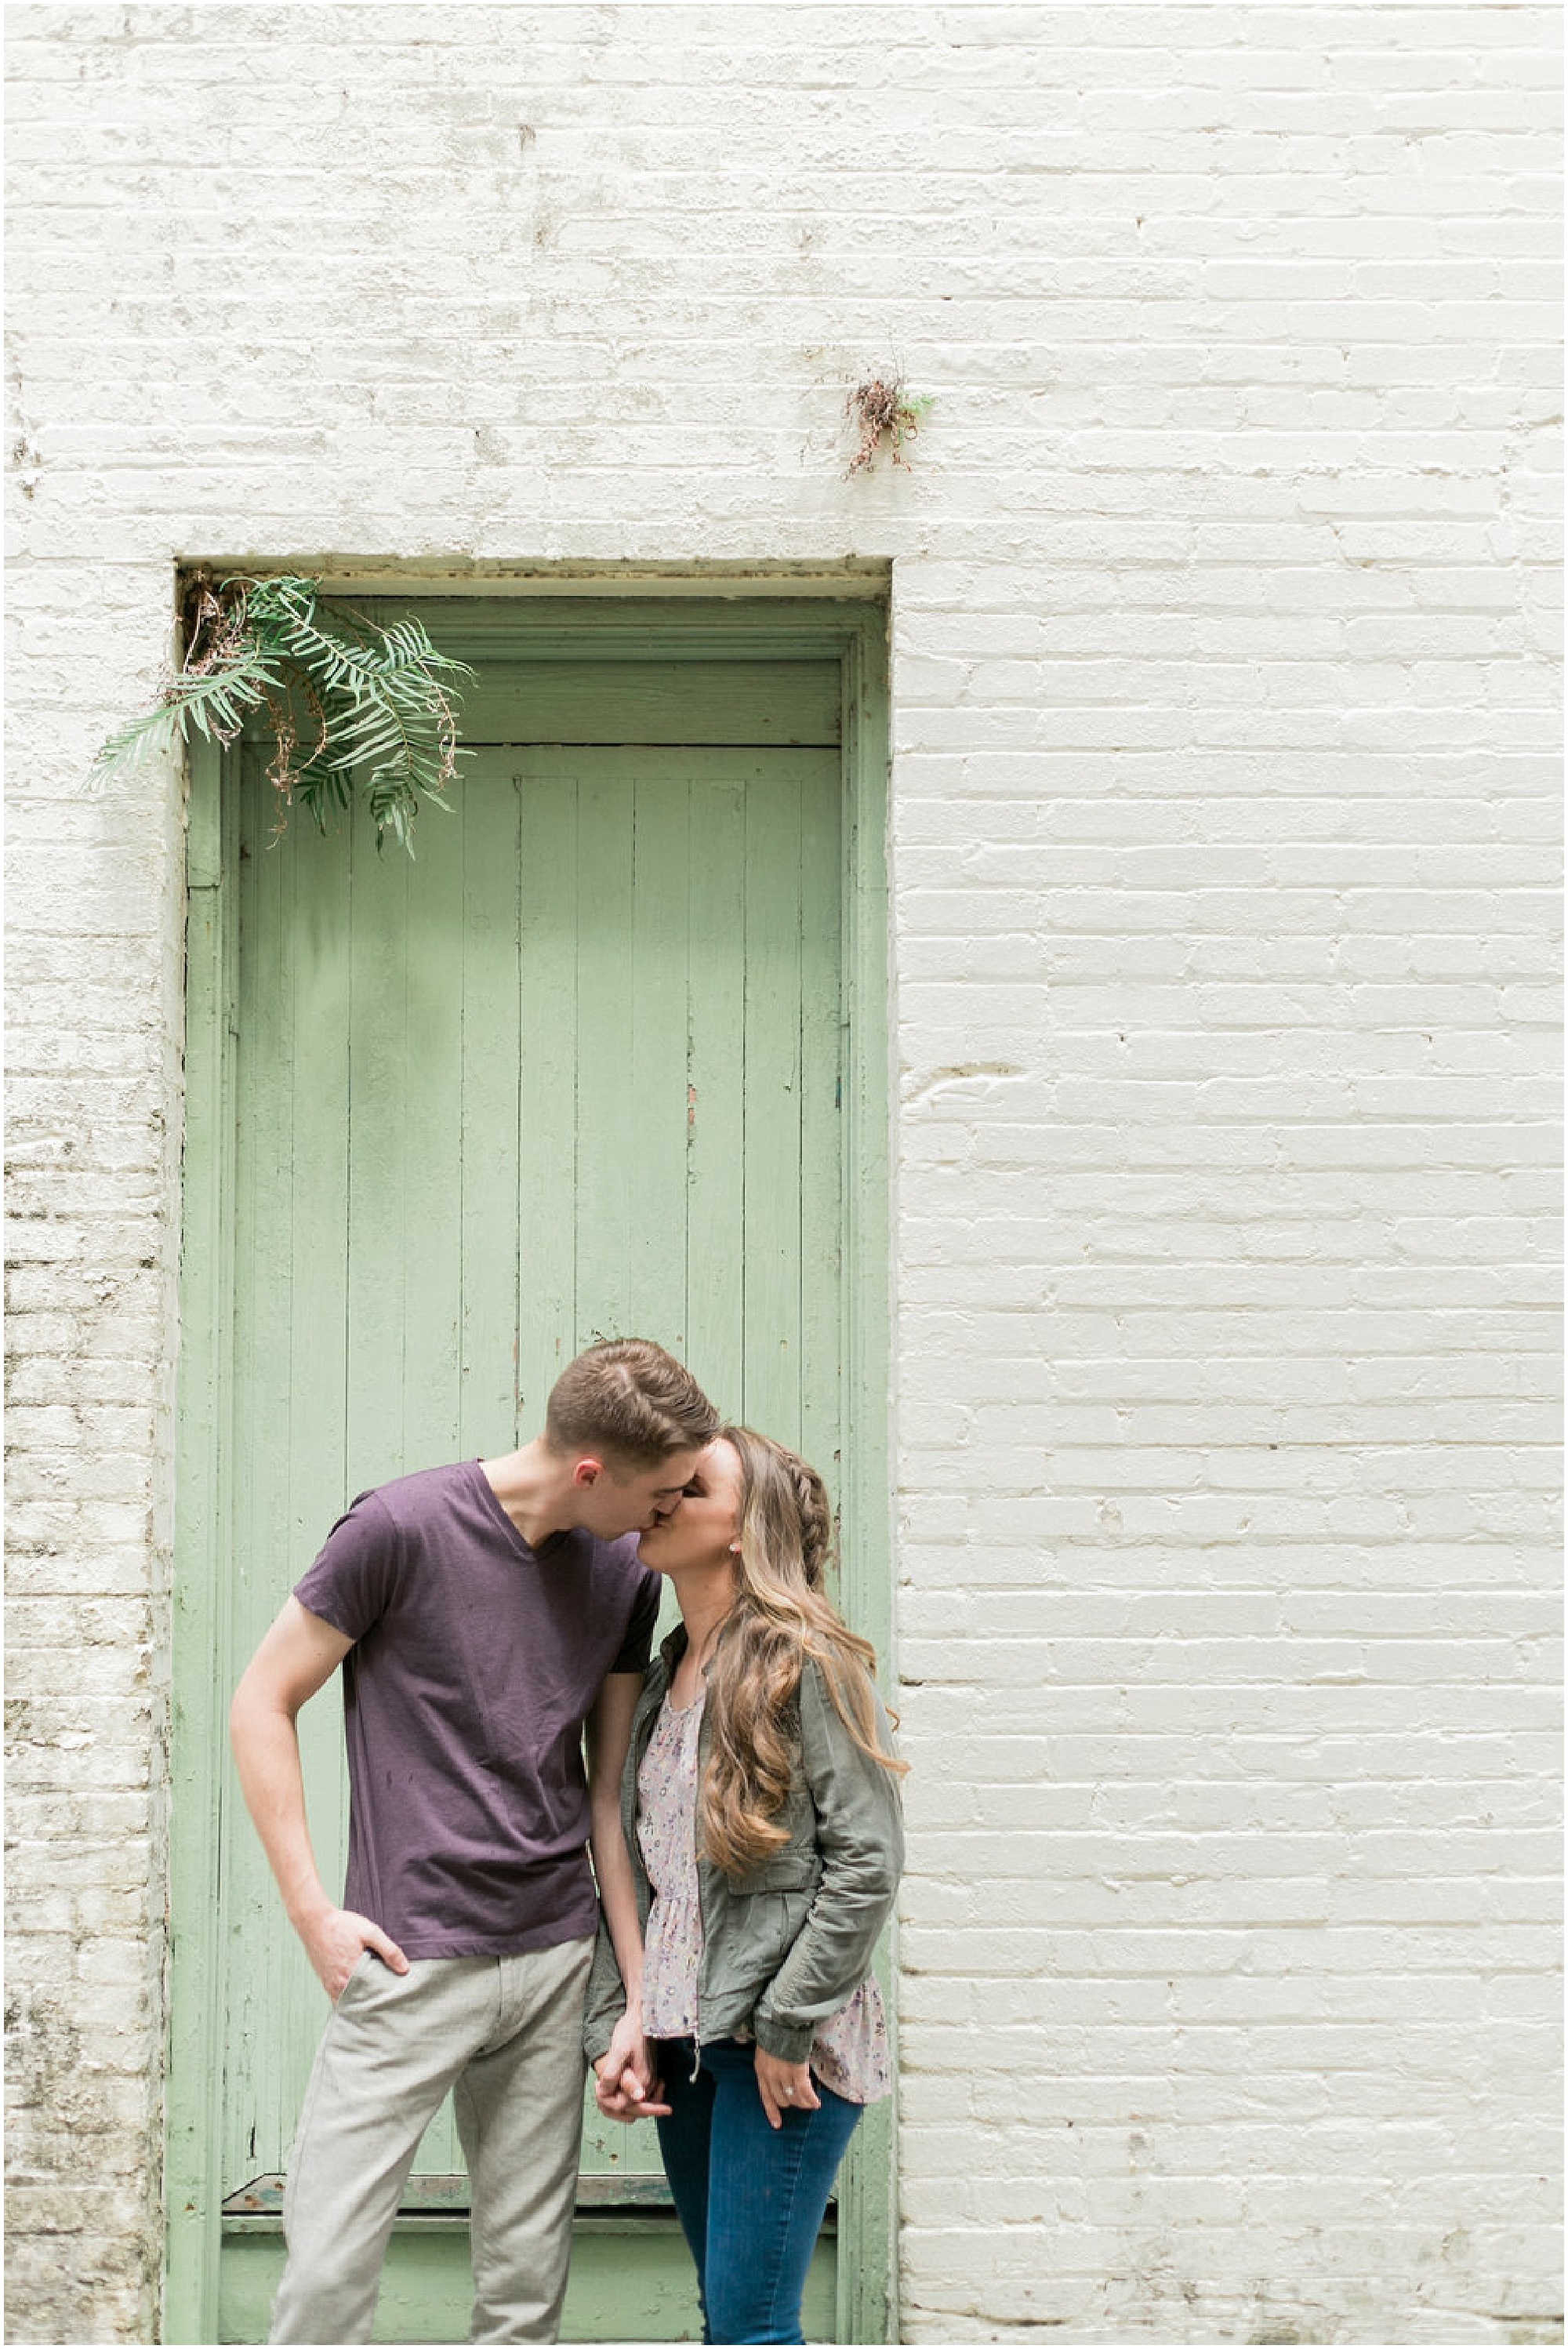 Engaged couple kissing in front of historic green door in Sanford, FL.